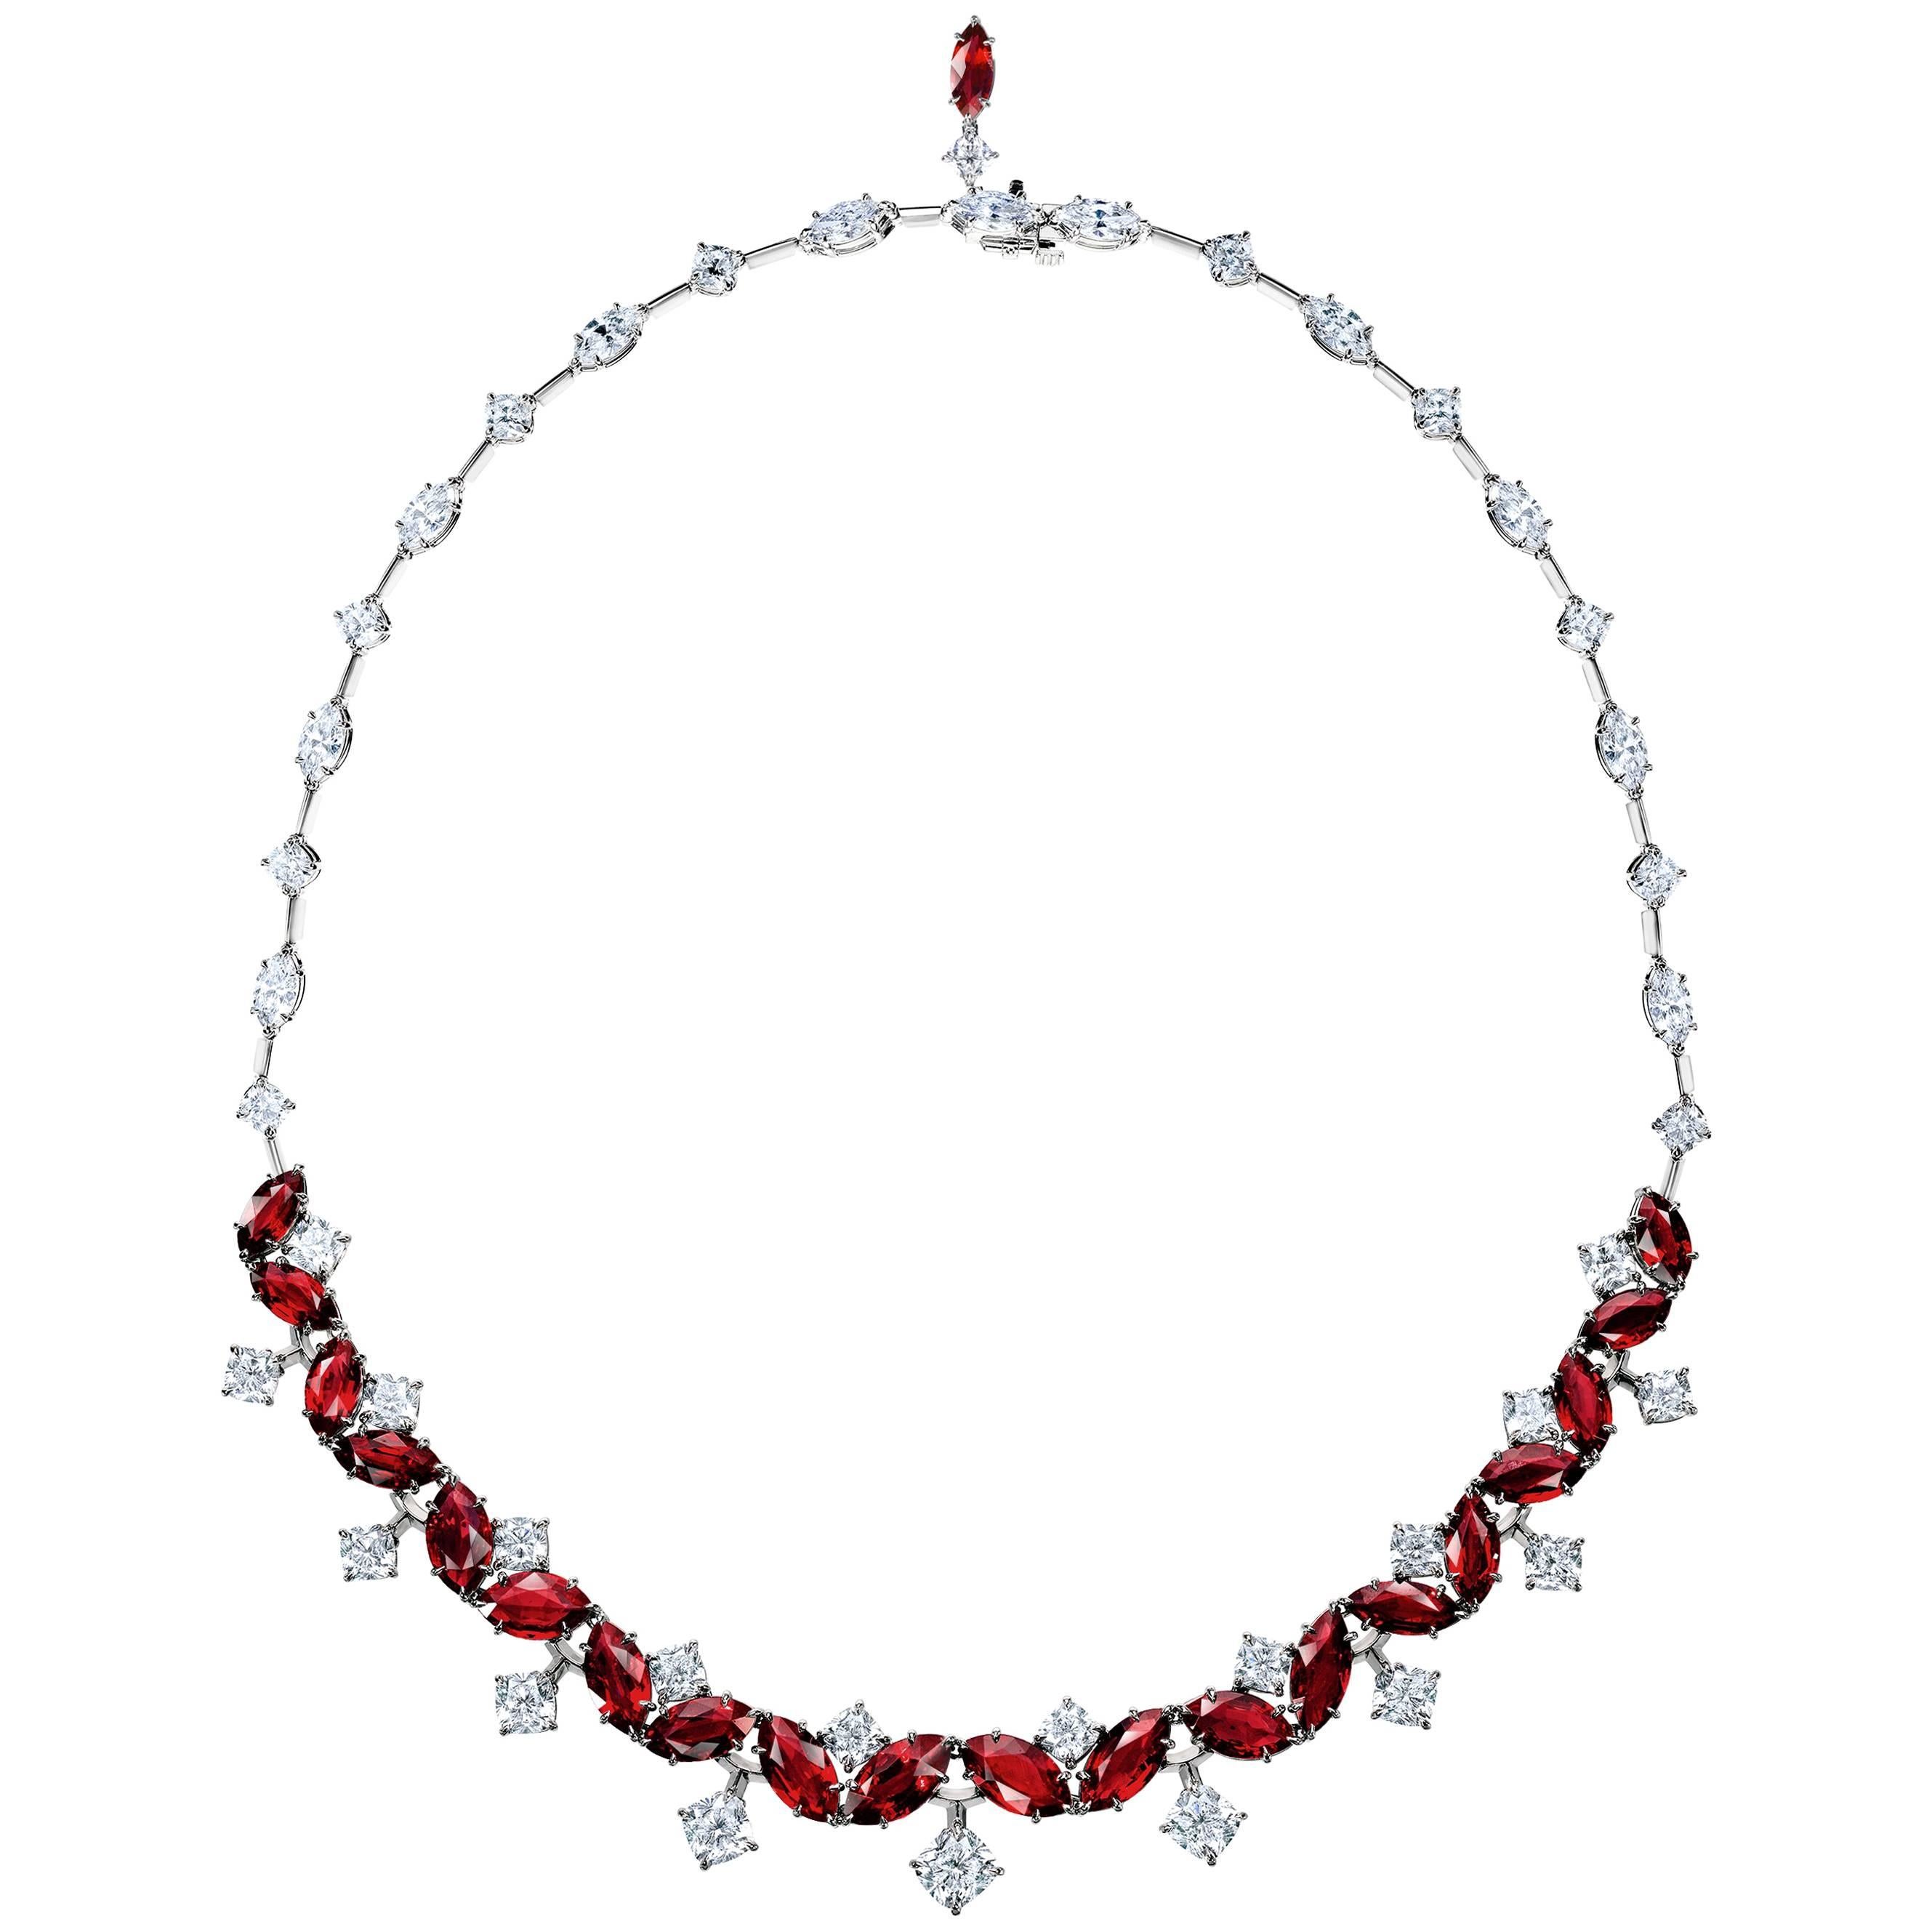 Award Winning 29.30 Carat Mozambique Ruby and Diamond Necklace